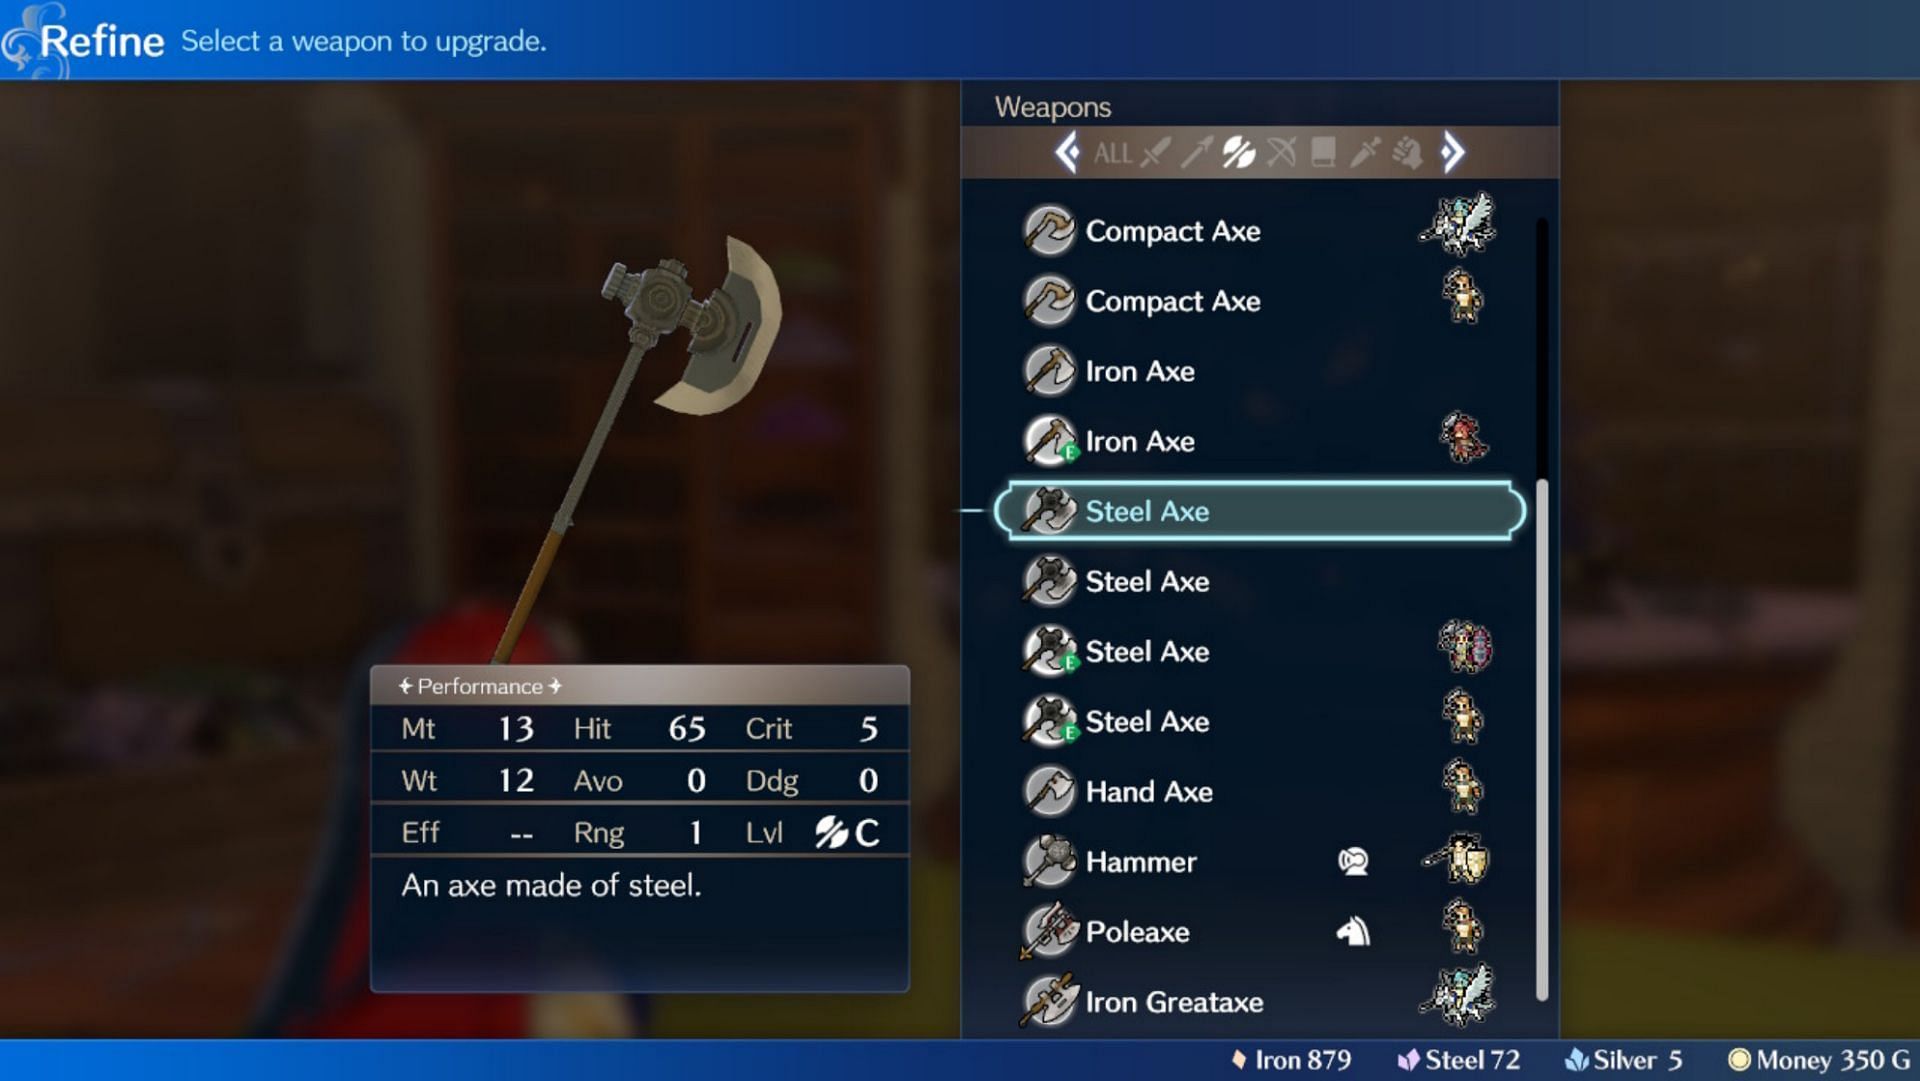 Forging and upgrading weapons is an important part of Fire Emblem Engage.